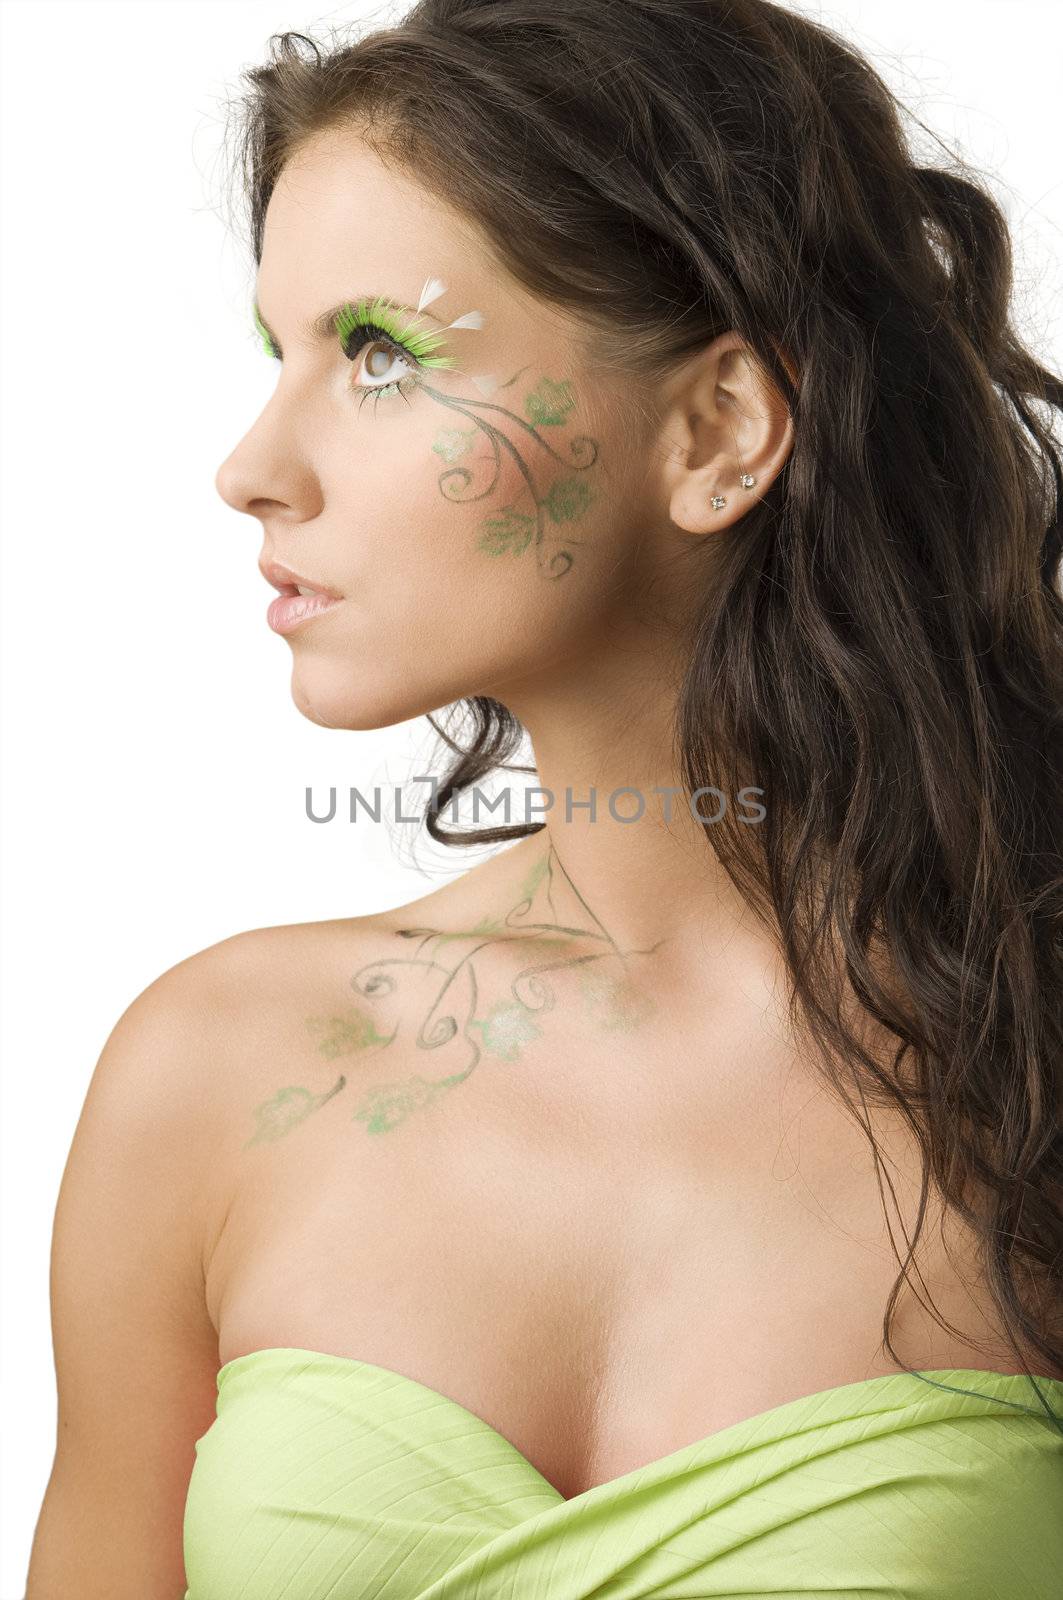 nice portrait of a young woman with paint on her body looking on one side